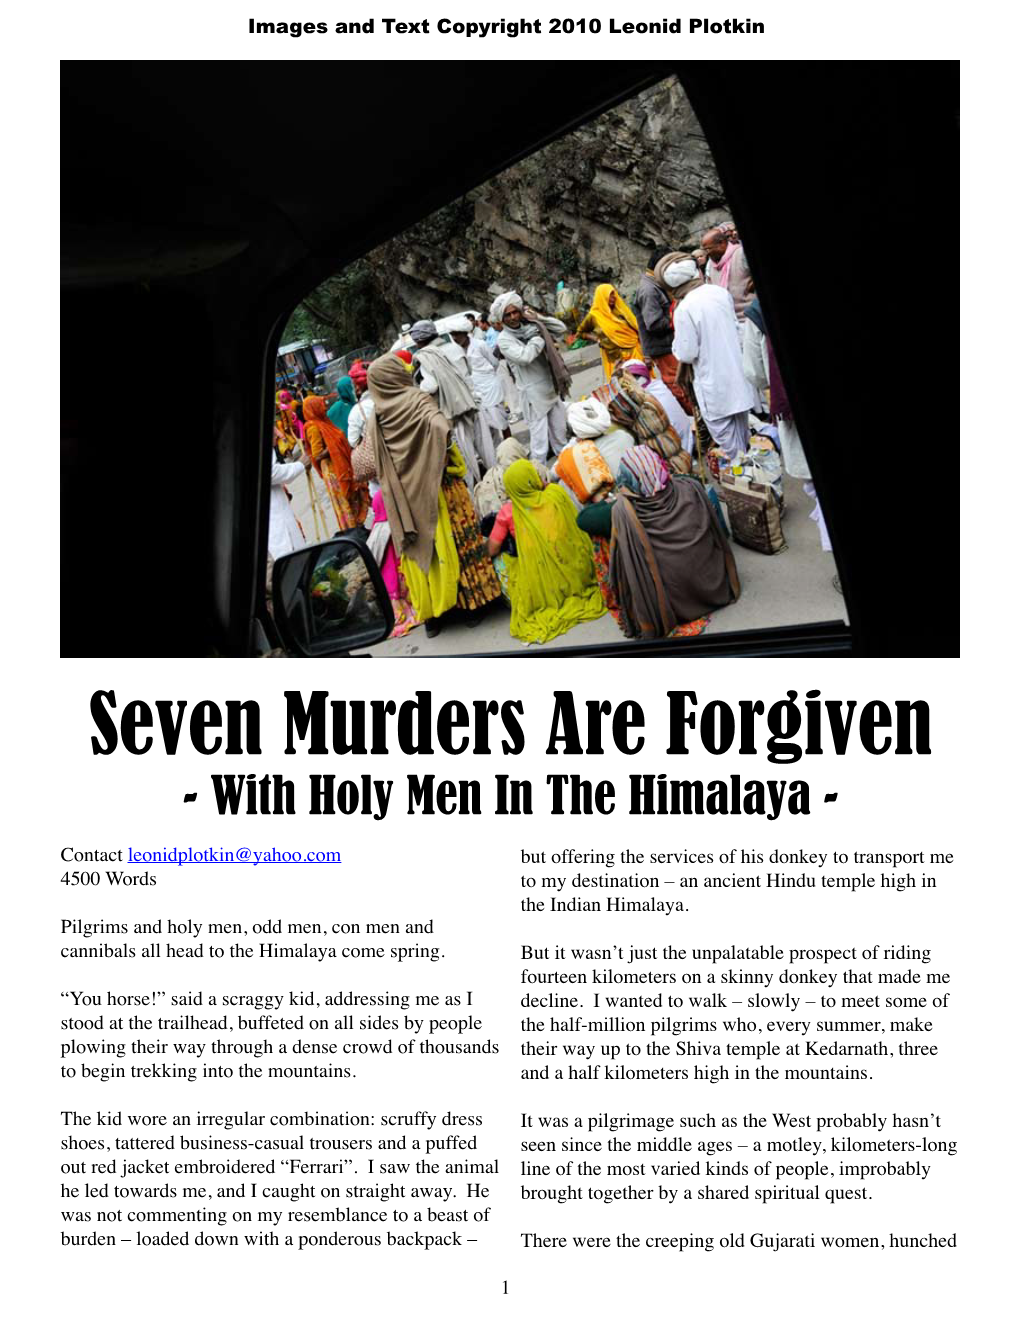 Seven Murders Are Forgiven - with Holy Men in the Himalaya